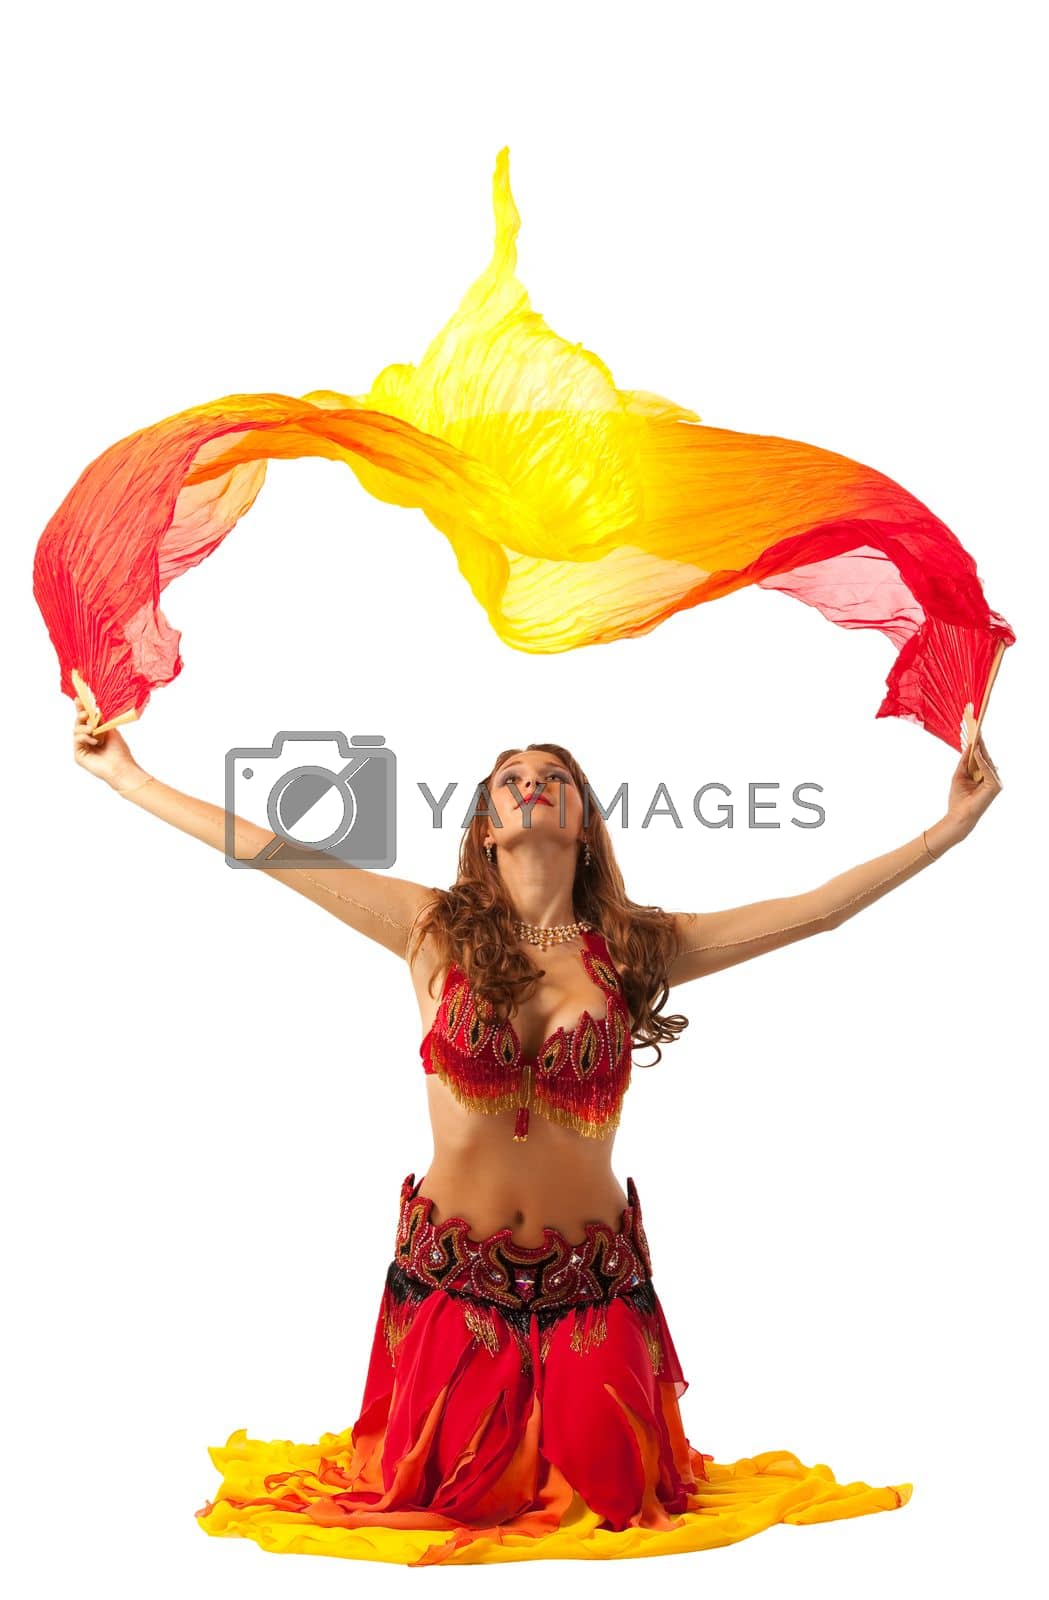 Royalty free image of woman dance with fantail in oriental costume by rivertime